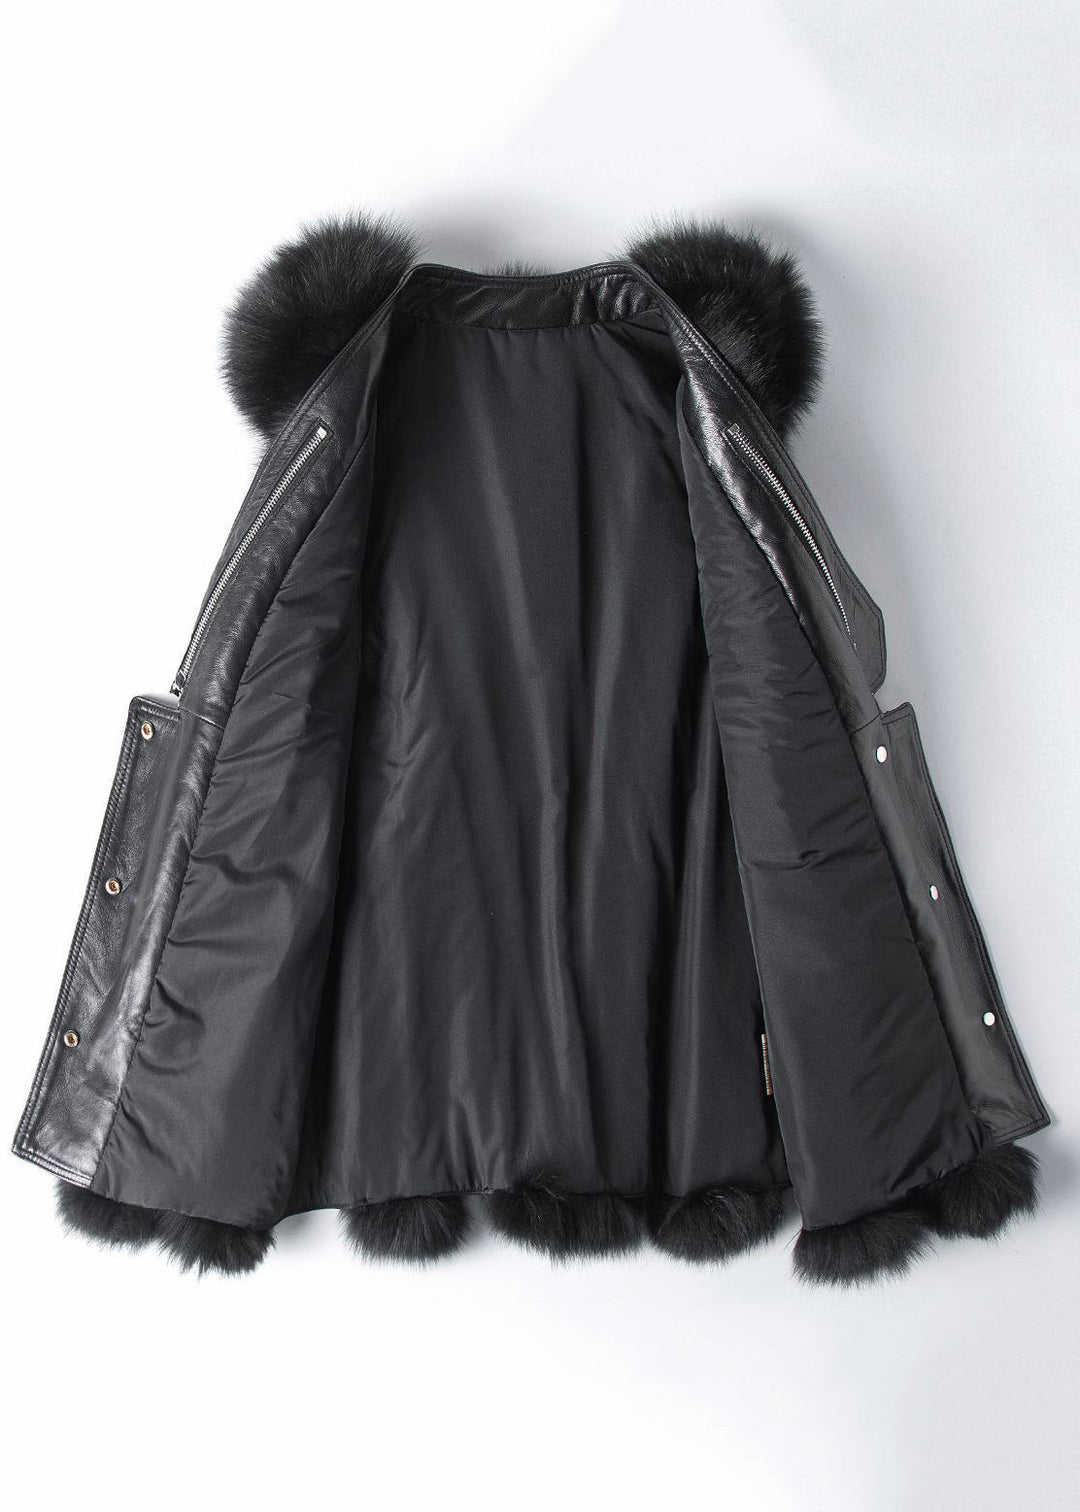 New Black Button Patchwork Leather And Fur Waistcoat Sleeveless